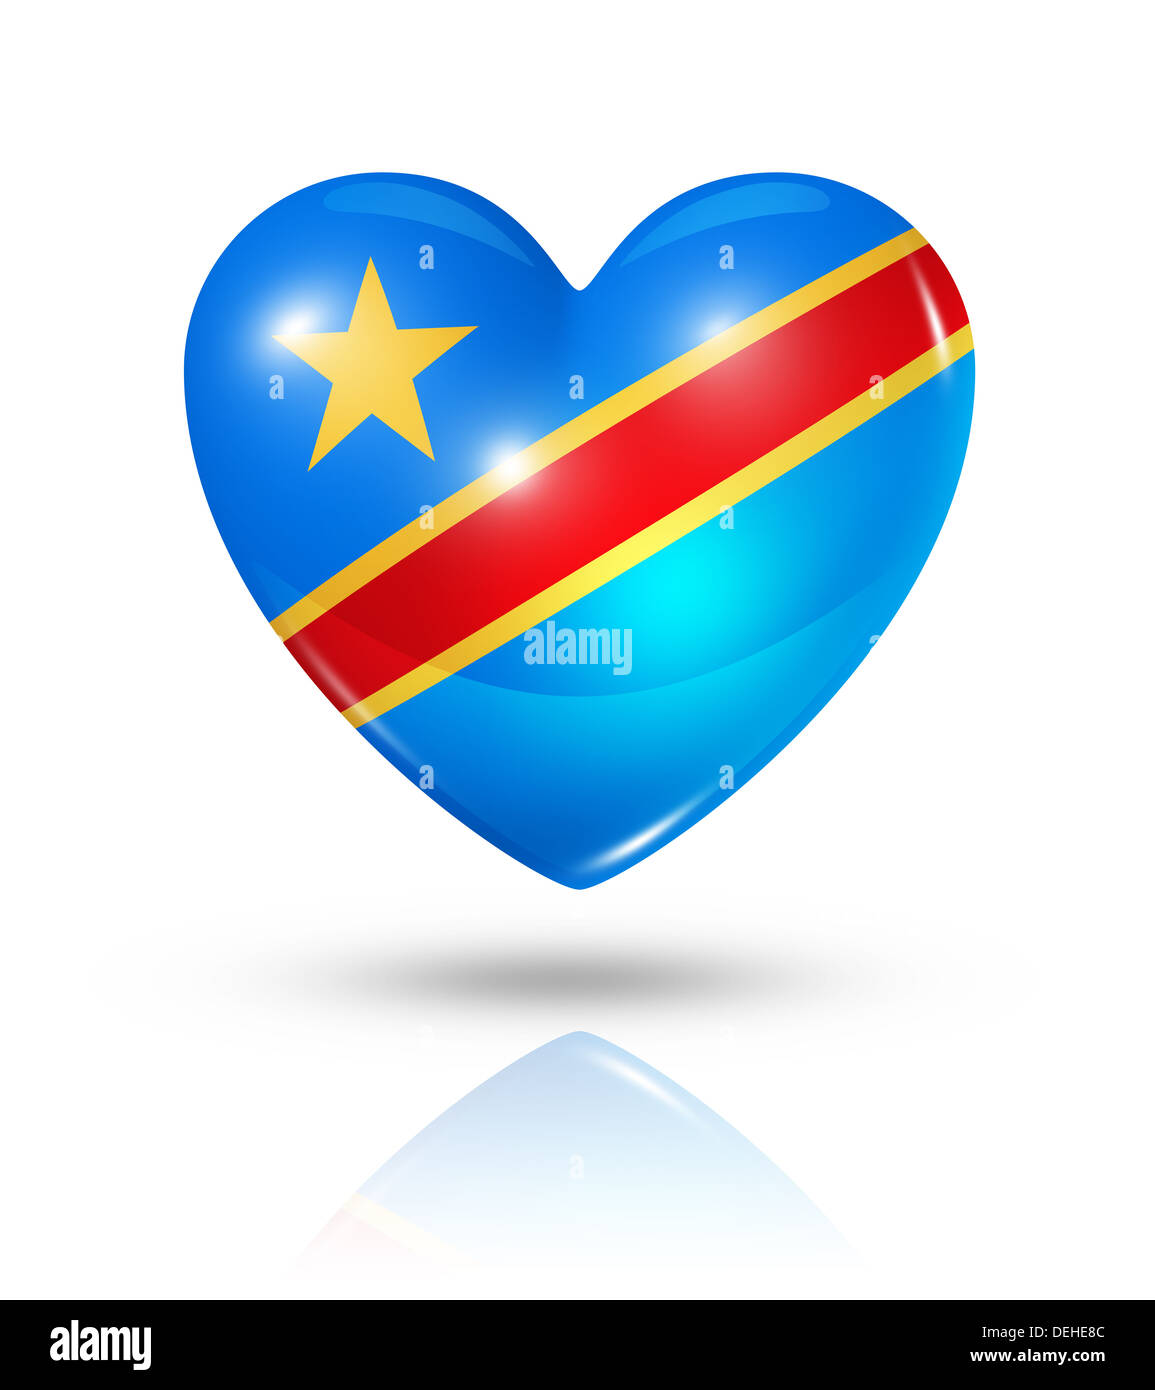 Love Democratic Republic of the Congo symbol. 3D heart flag icon isolated on white with clipping path Stock Photo